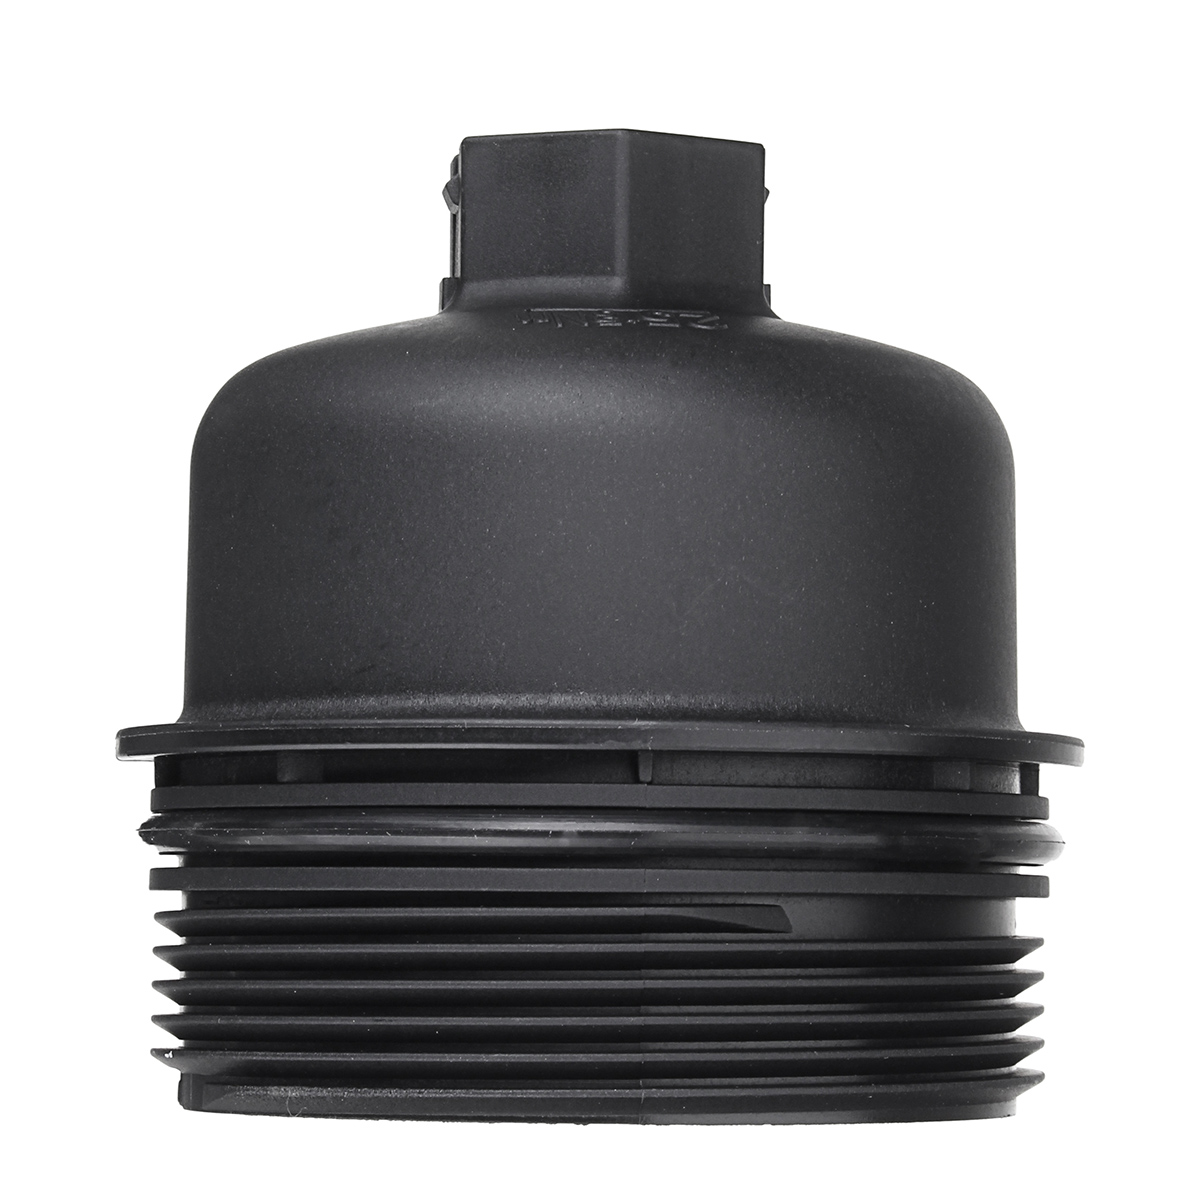 Oil-Filter-Lid-Housing-Top-Cover-Cap-For-Ford-Transit-MK7-Galaxy-Mondeo-Focus-1368557